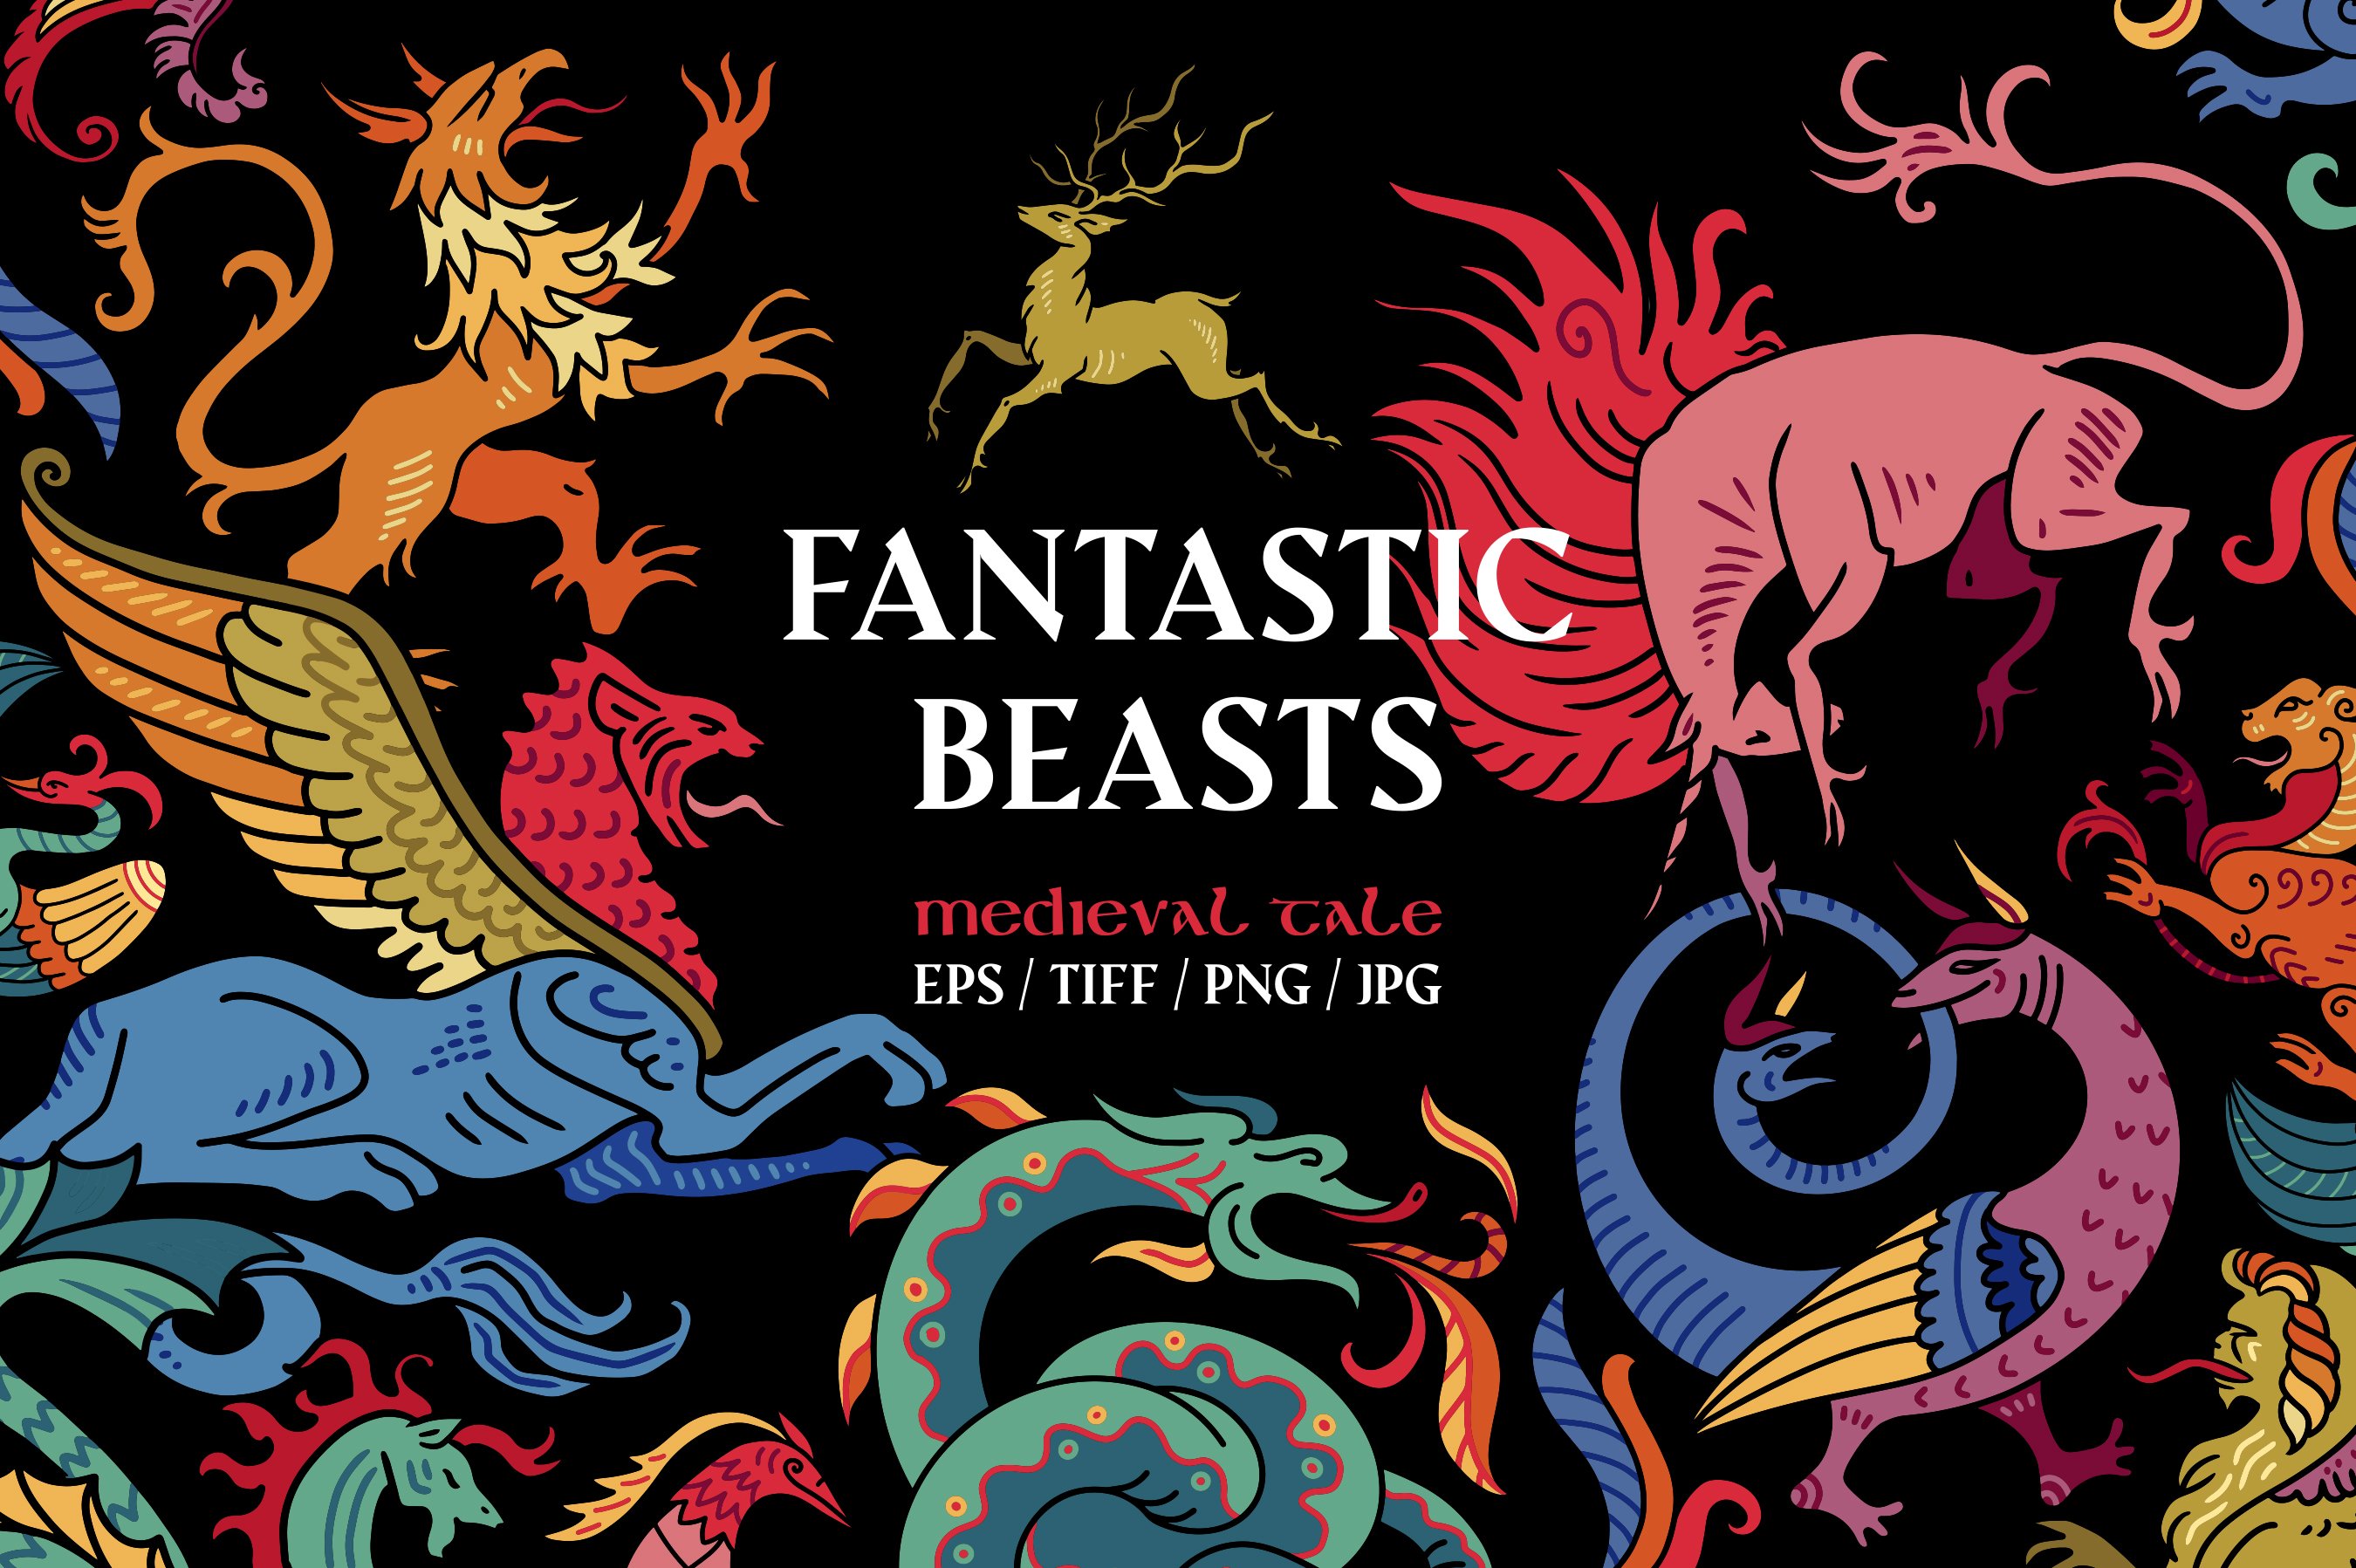 Fantastic beasts 3. Medieval tale cover image.